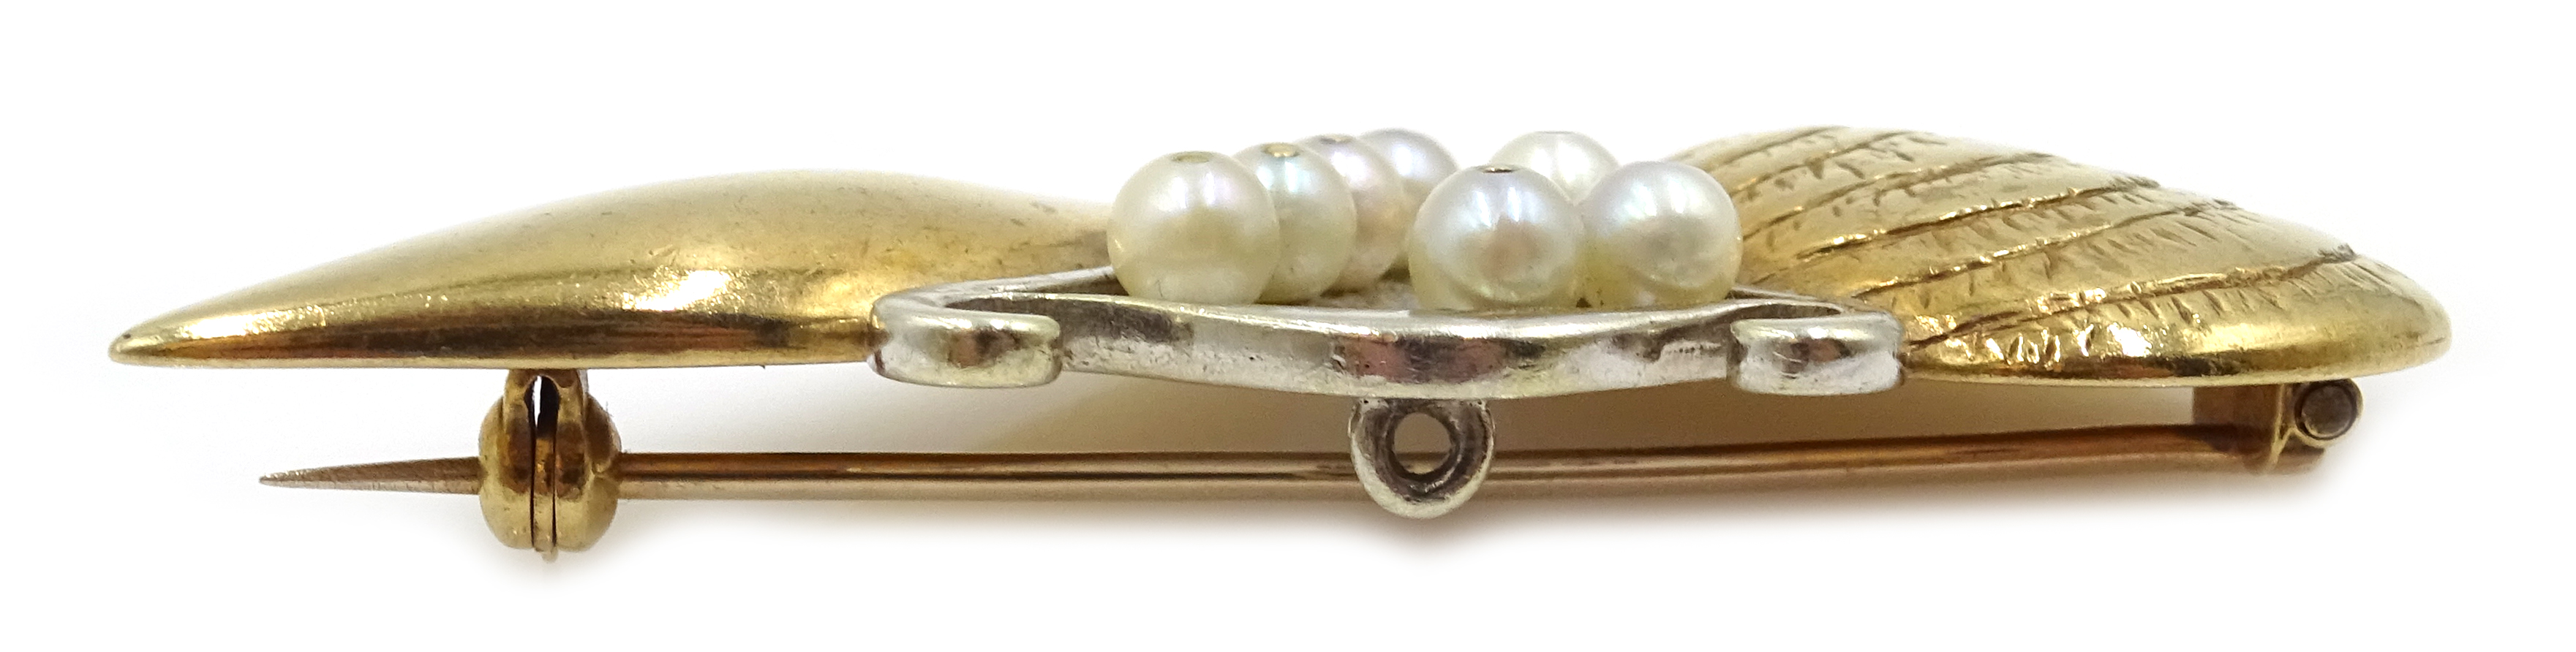 Modernist 9ct yellow and white gold pearl brooch hallmarked, maker's mark P.S London 1988 13. - Image 3 of 3